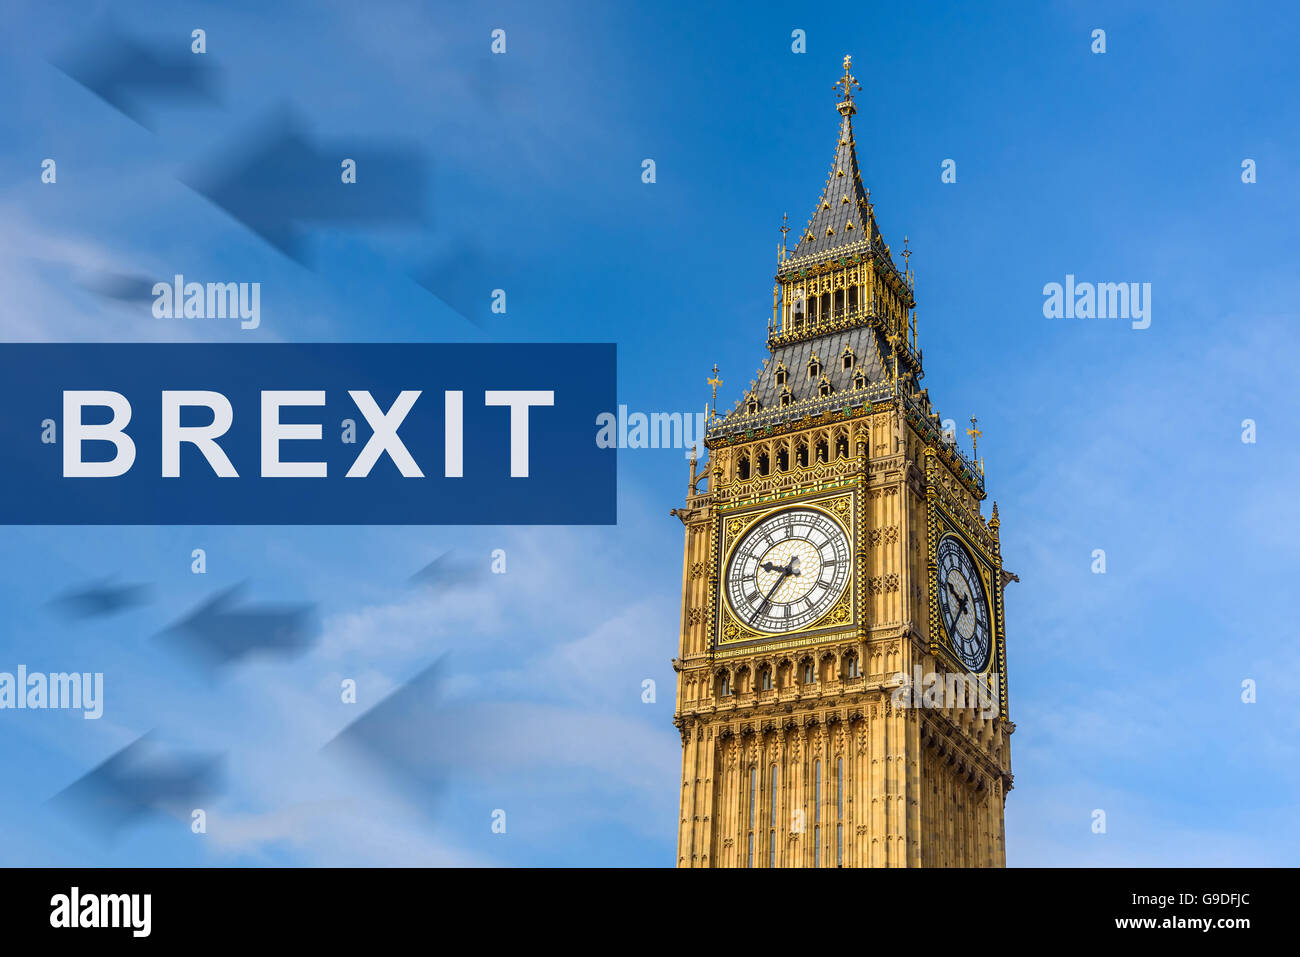 brexit or british exit with Big Ben Clock Tower, London, England, UK Stock Photo